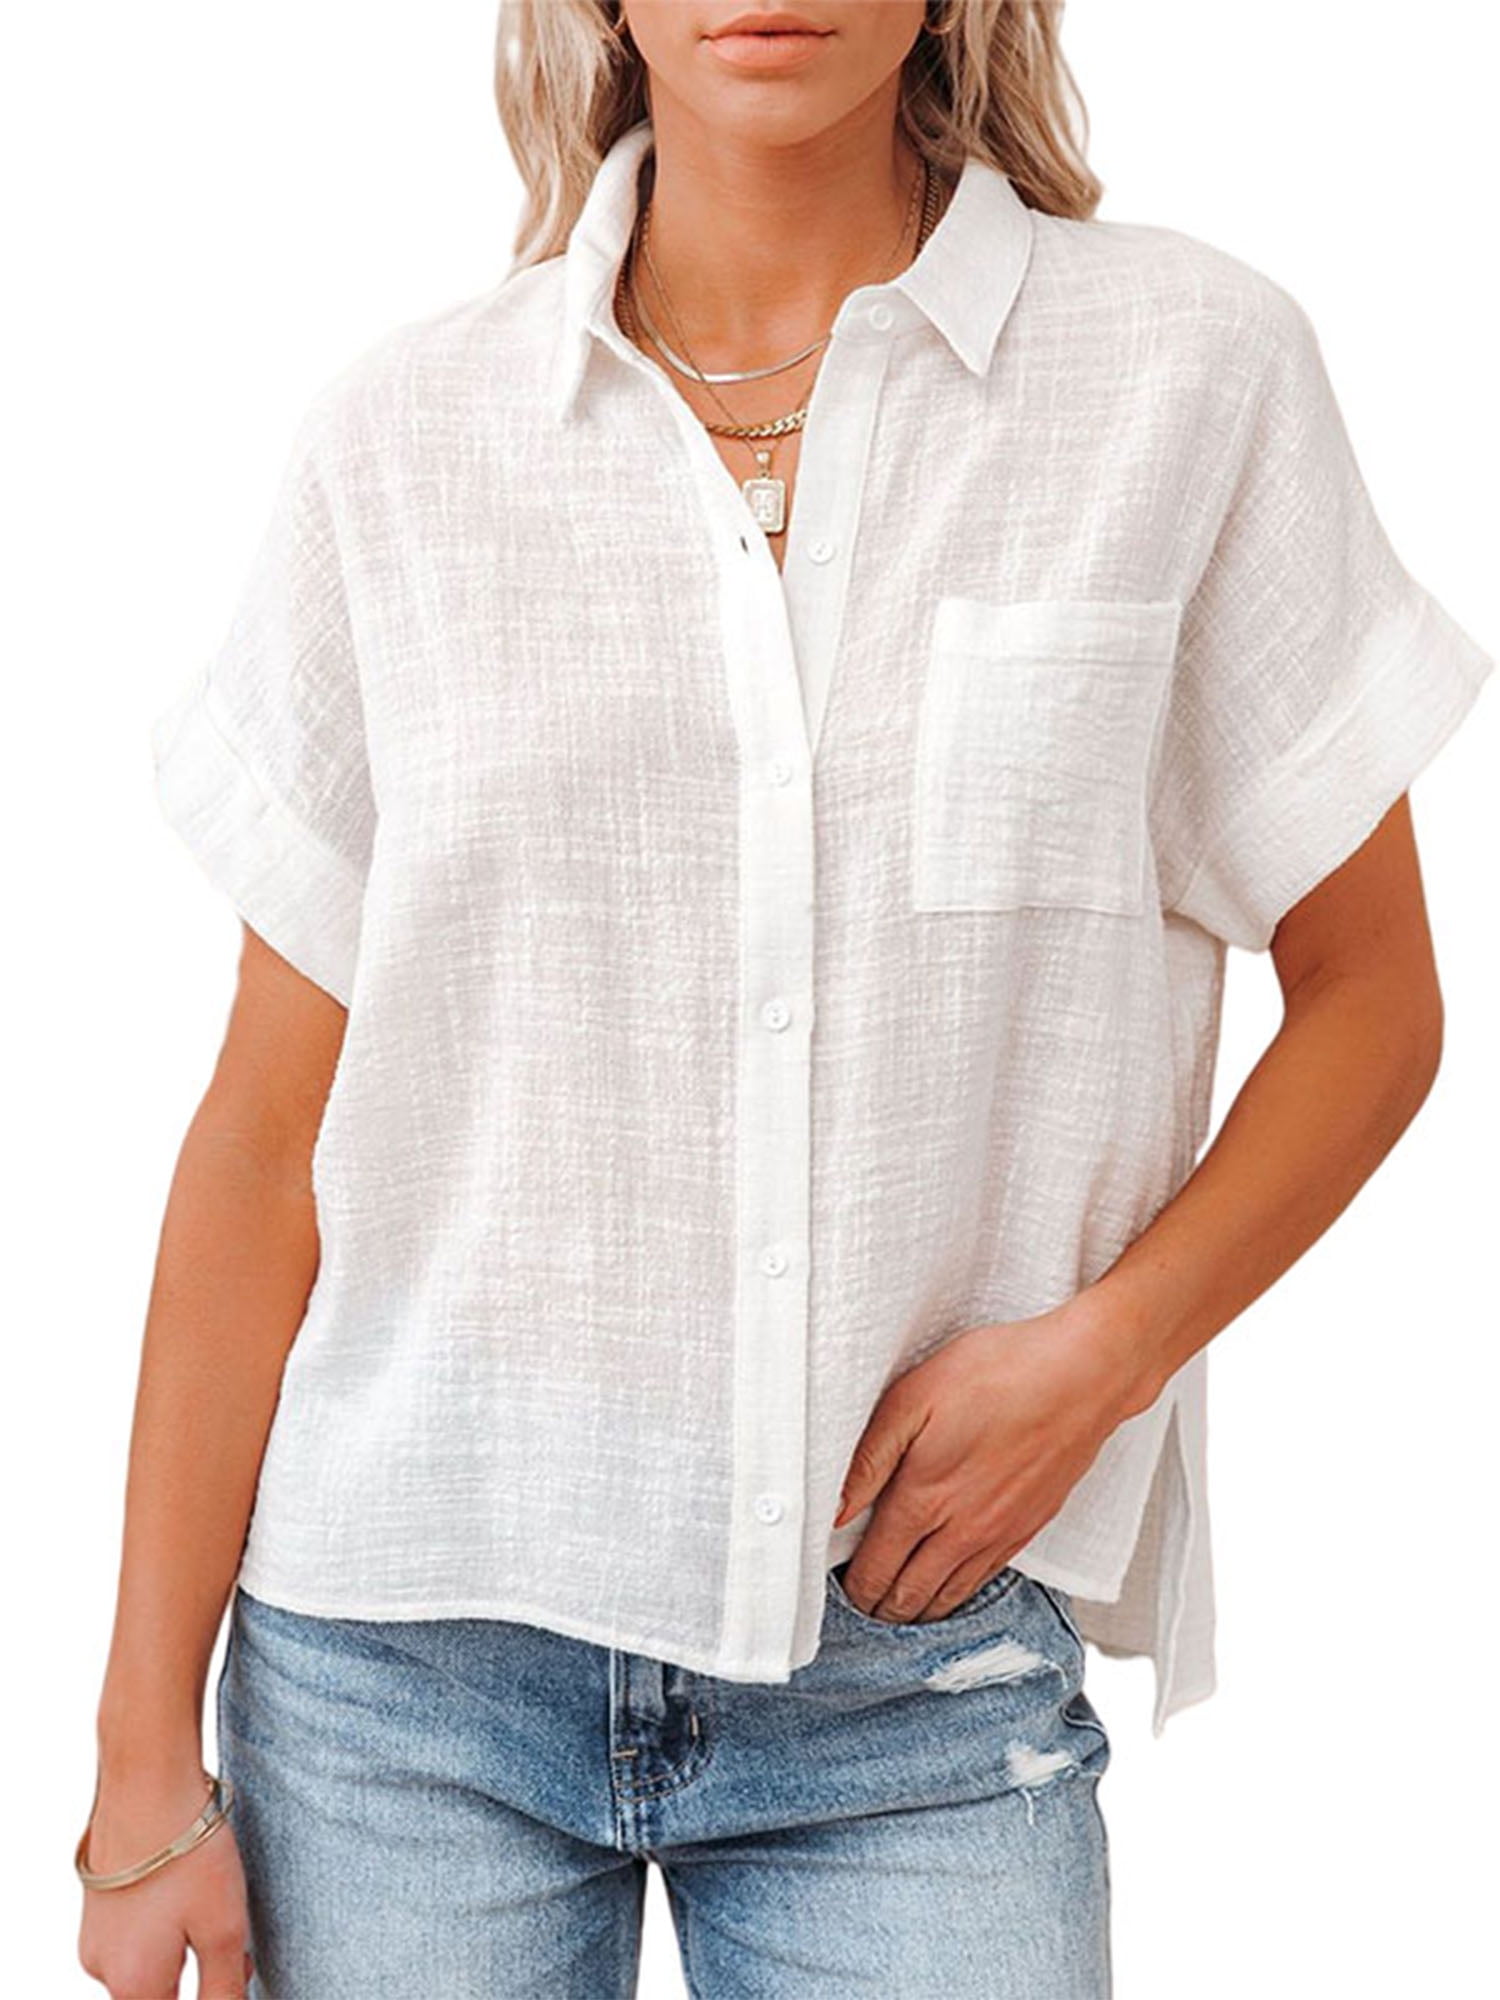 FUNEY Womens Button Down Blouse Shirts Short Sleeve V Neck Casual Loose Collared Tops with Pockets,Summer T Shirts S-3XL 